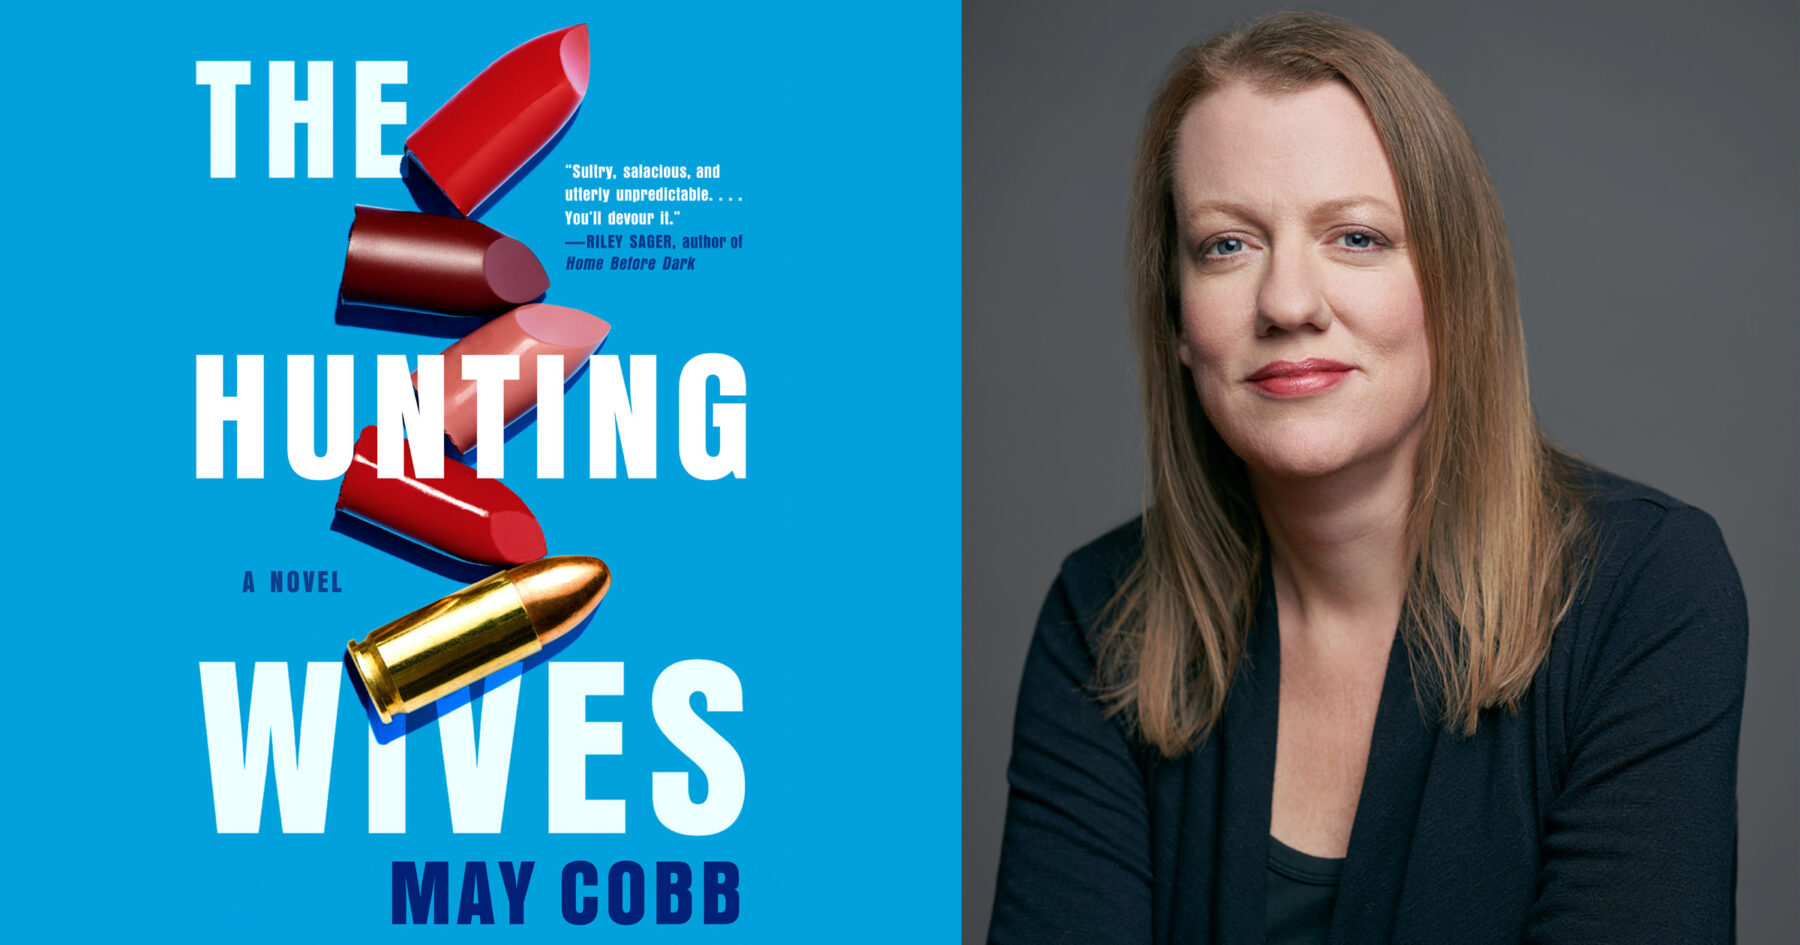 book cover, author photo, may cobb, the hunting wives